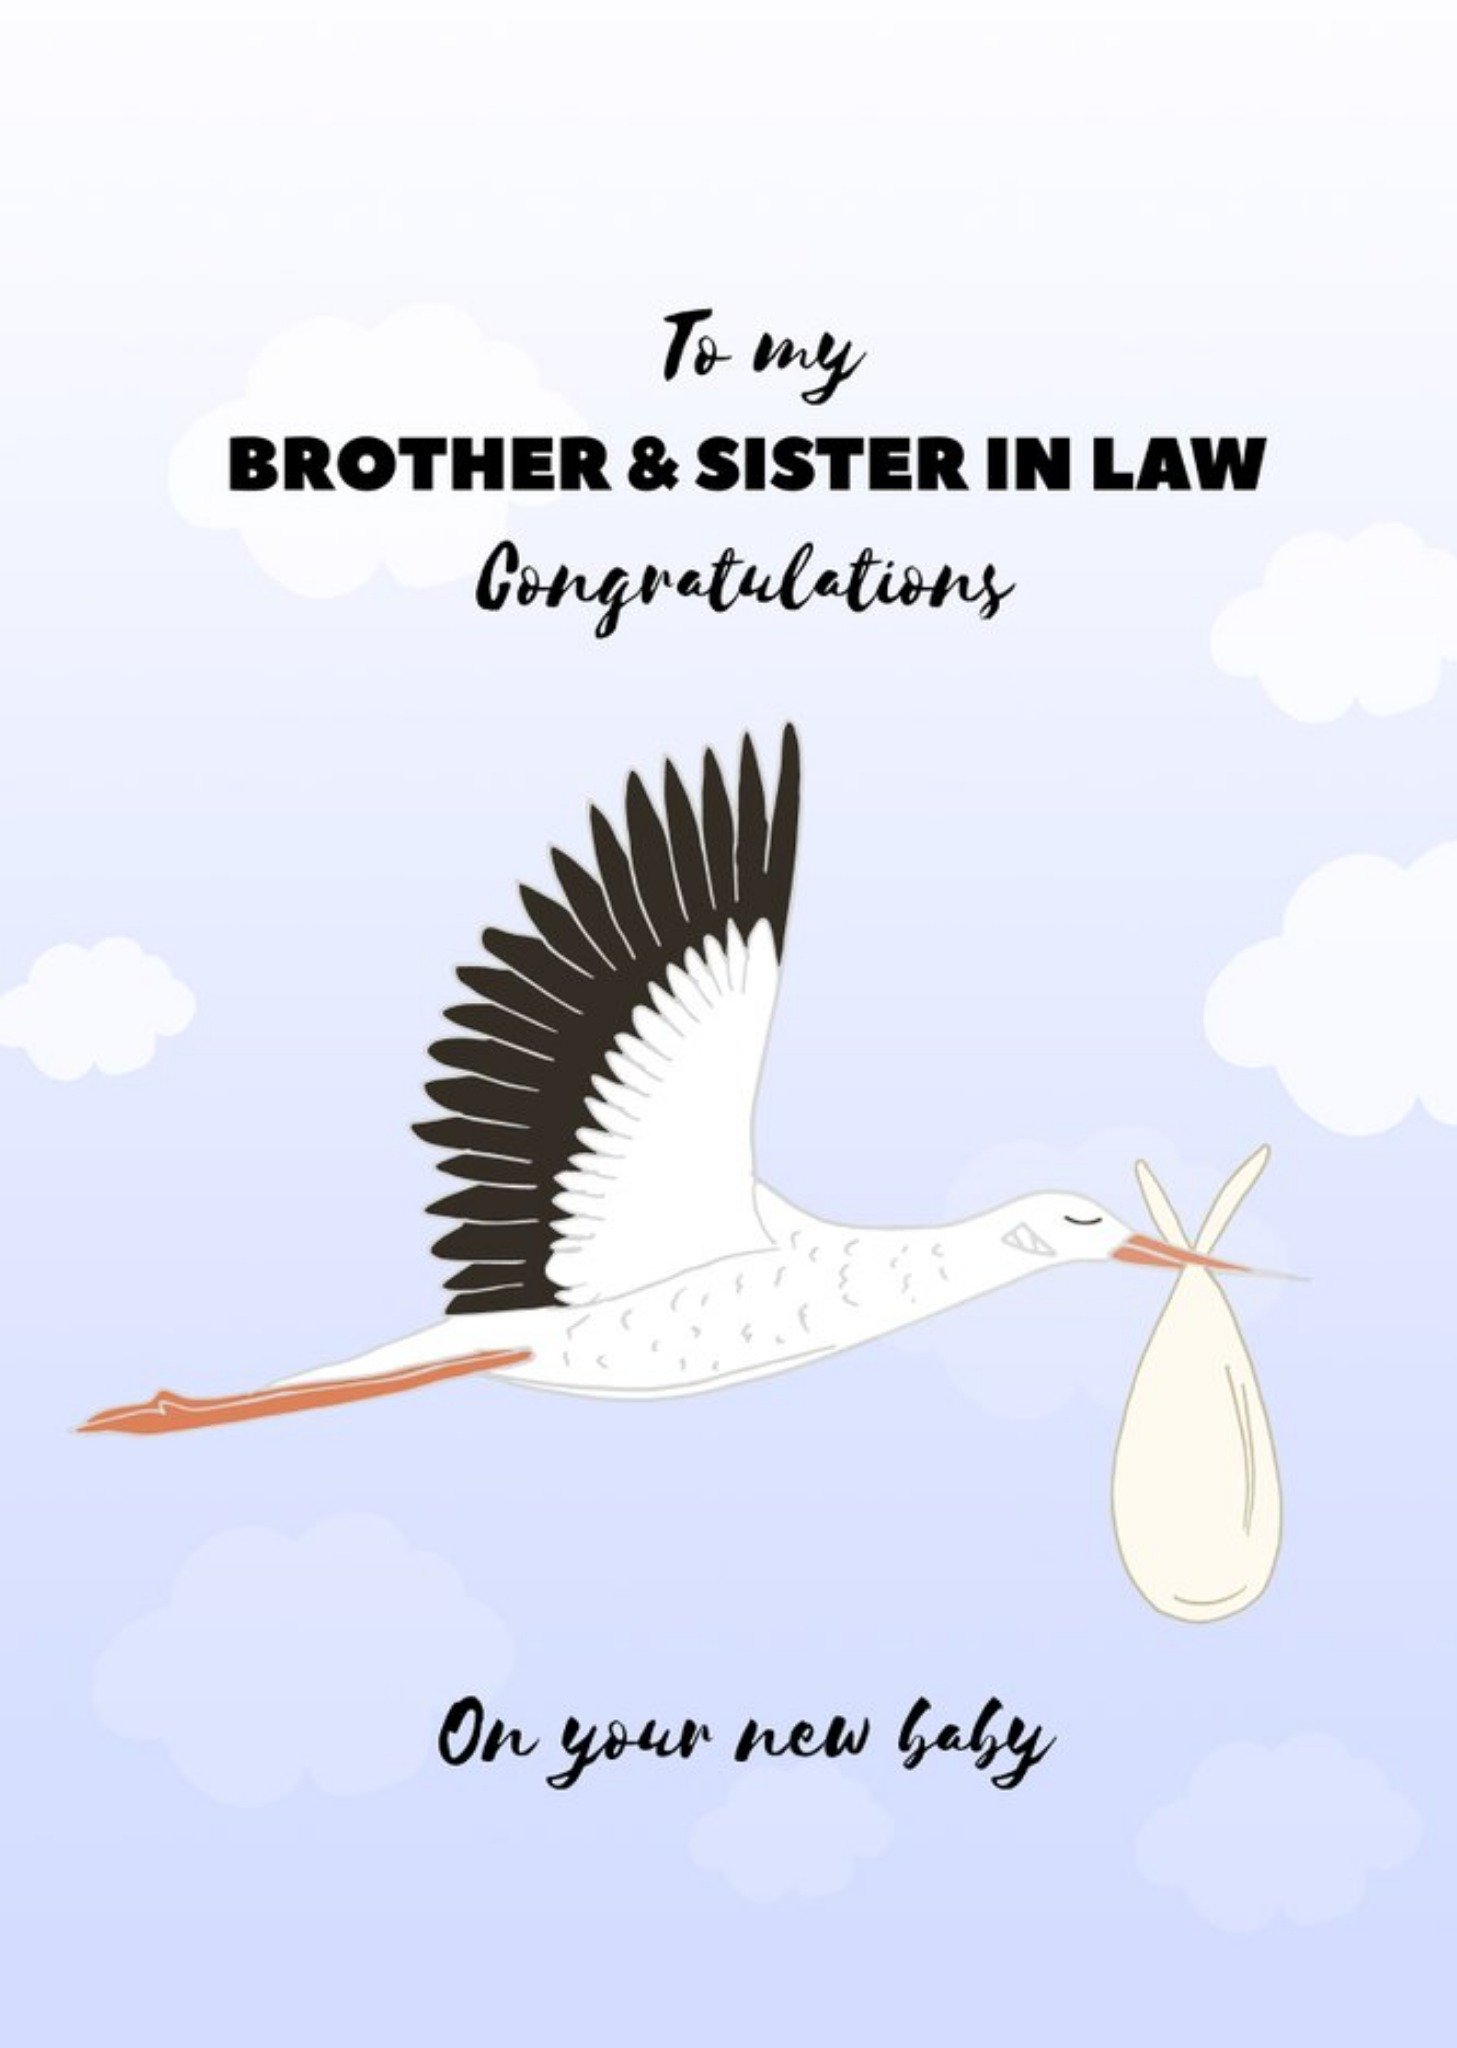 Moonpig Pearl And Ivy Illustrated Stork Brother & Sister-In-Law New Baby Congratulations Card, Large